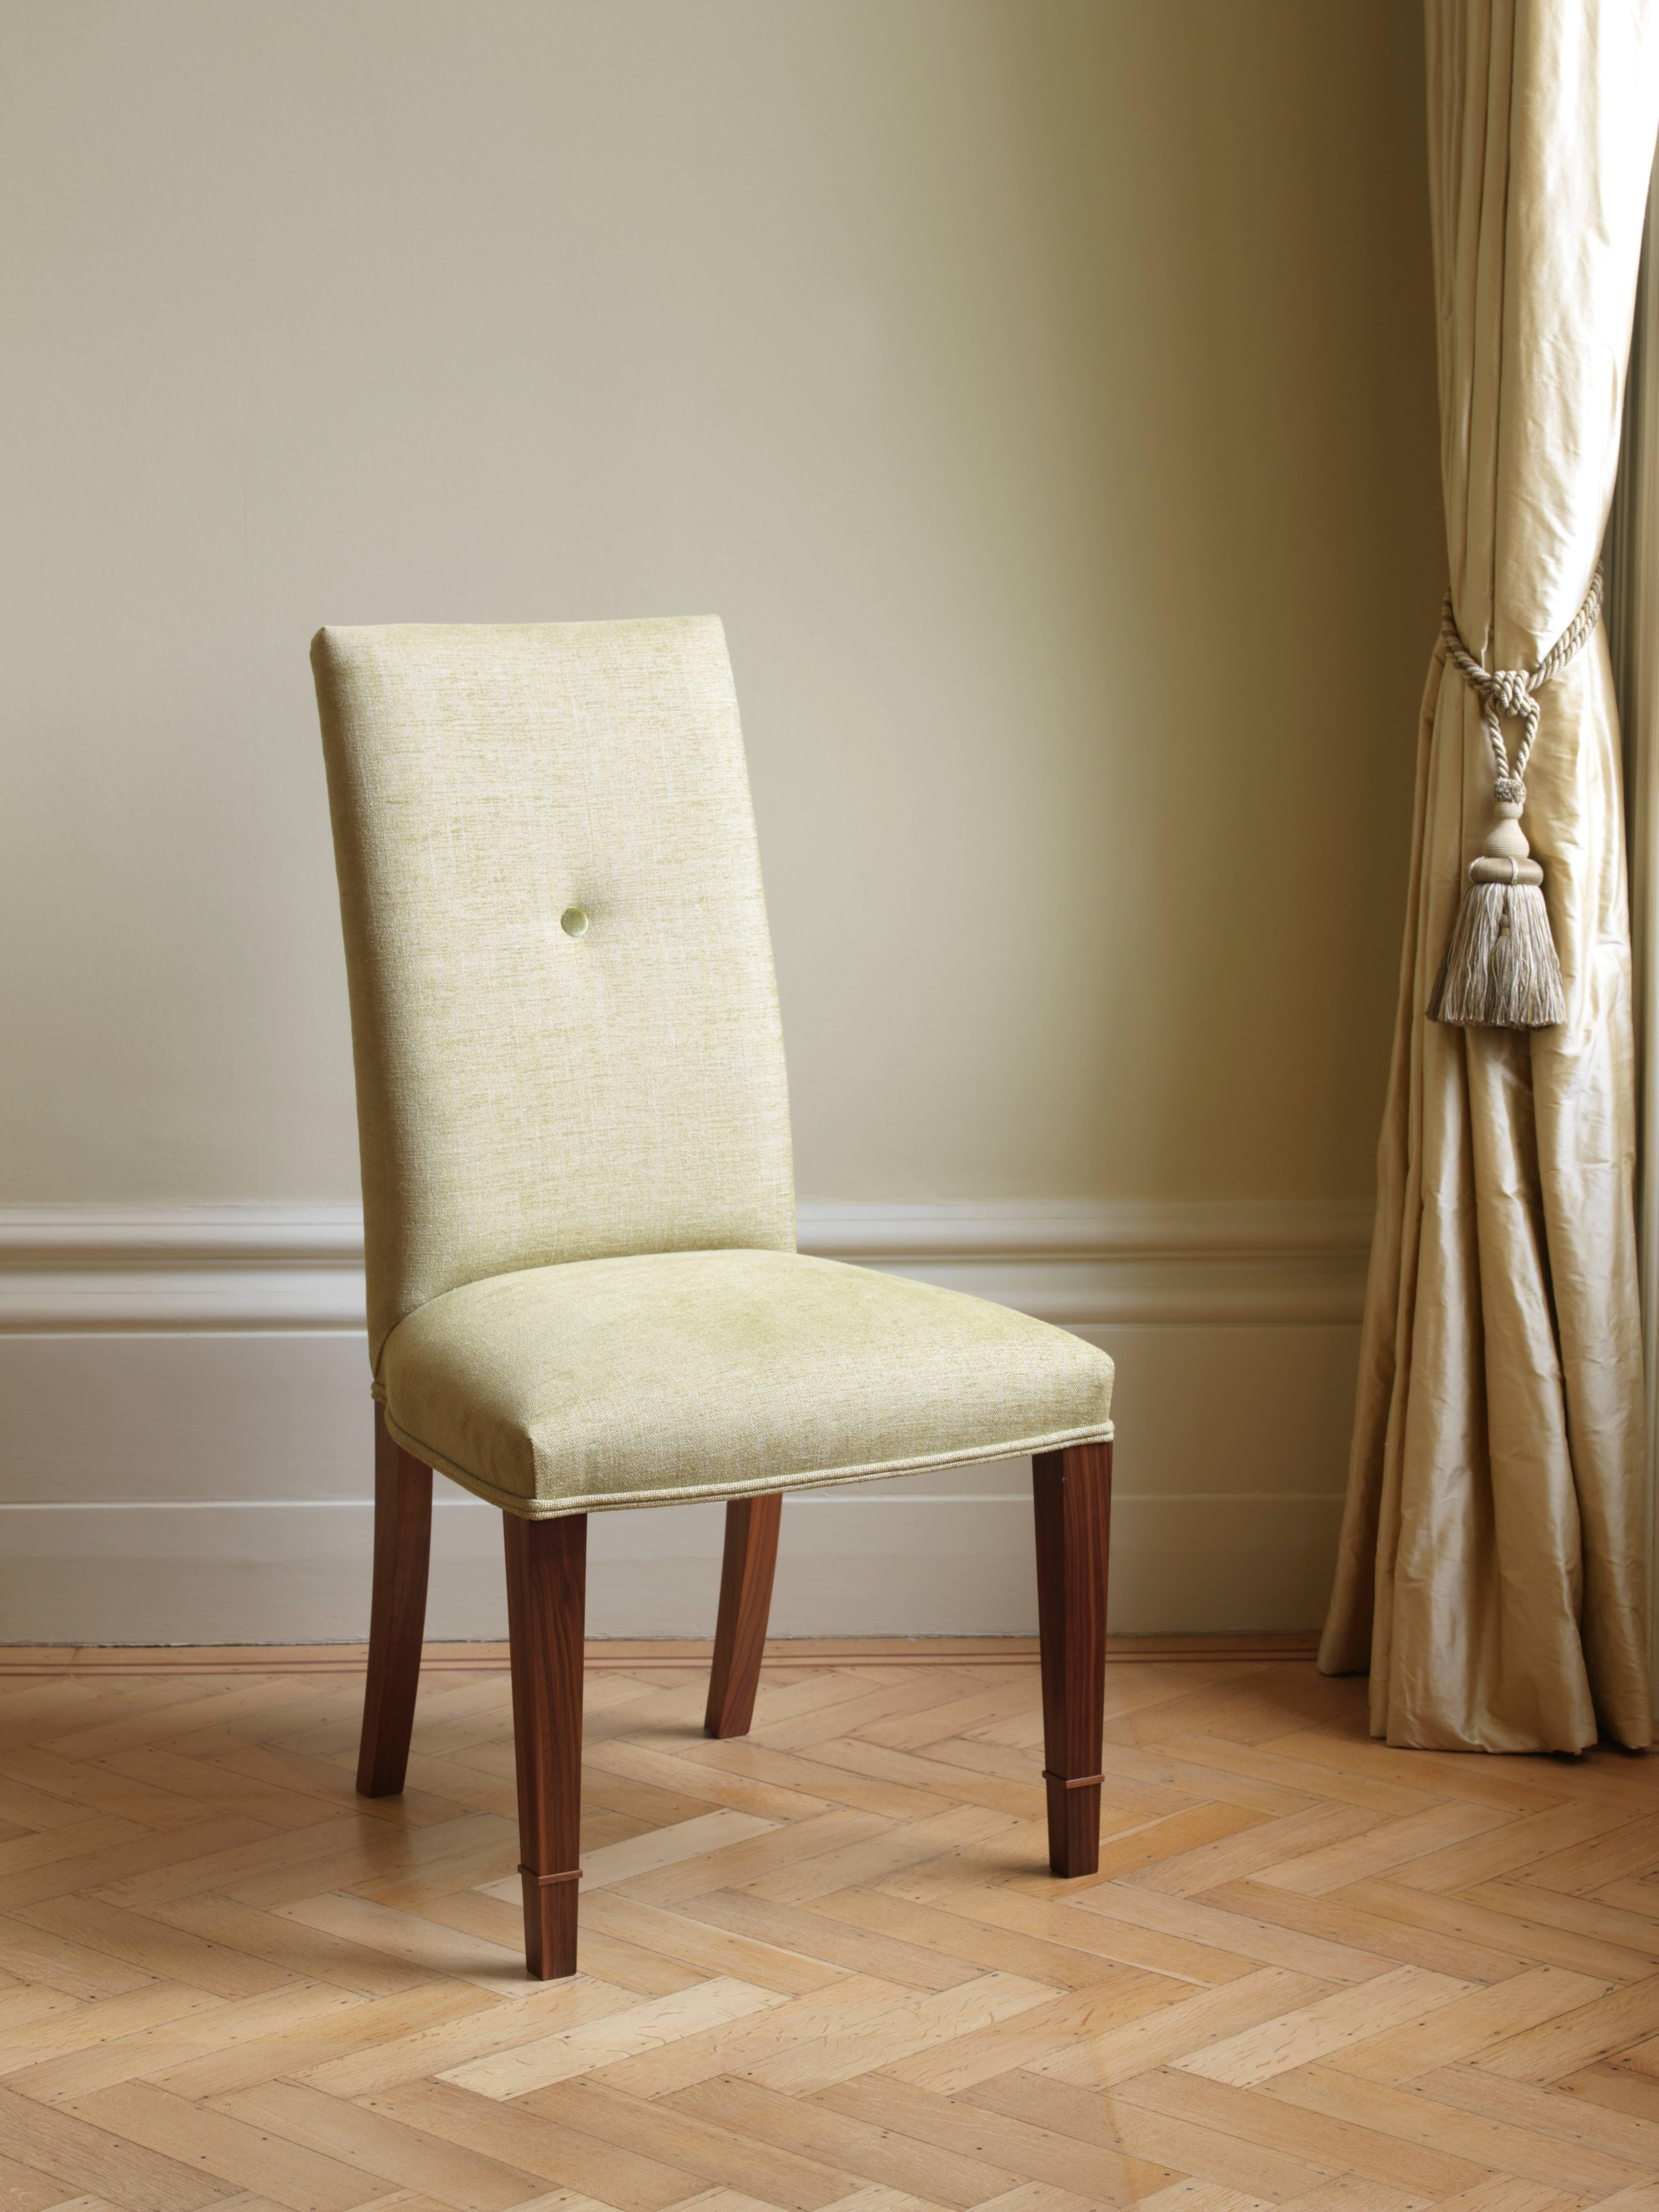 Contemporary Gosling Classic Dining Chair with Oak Frame and Upholstery details For Sale